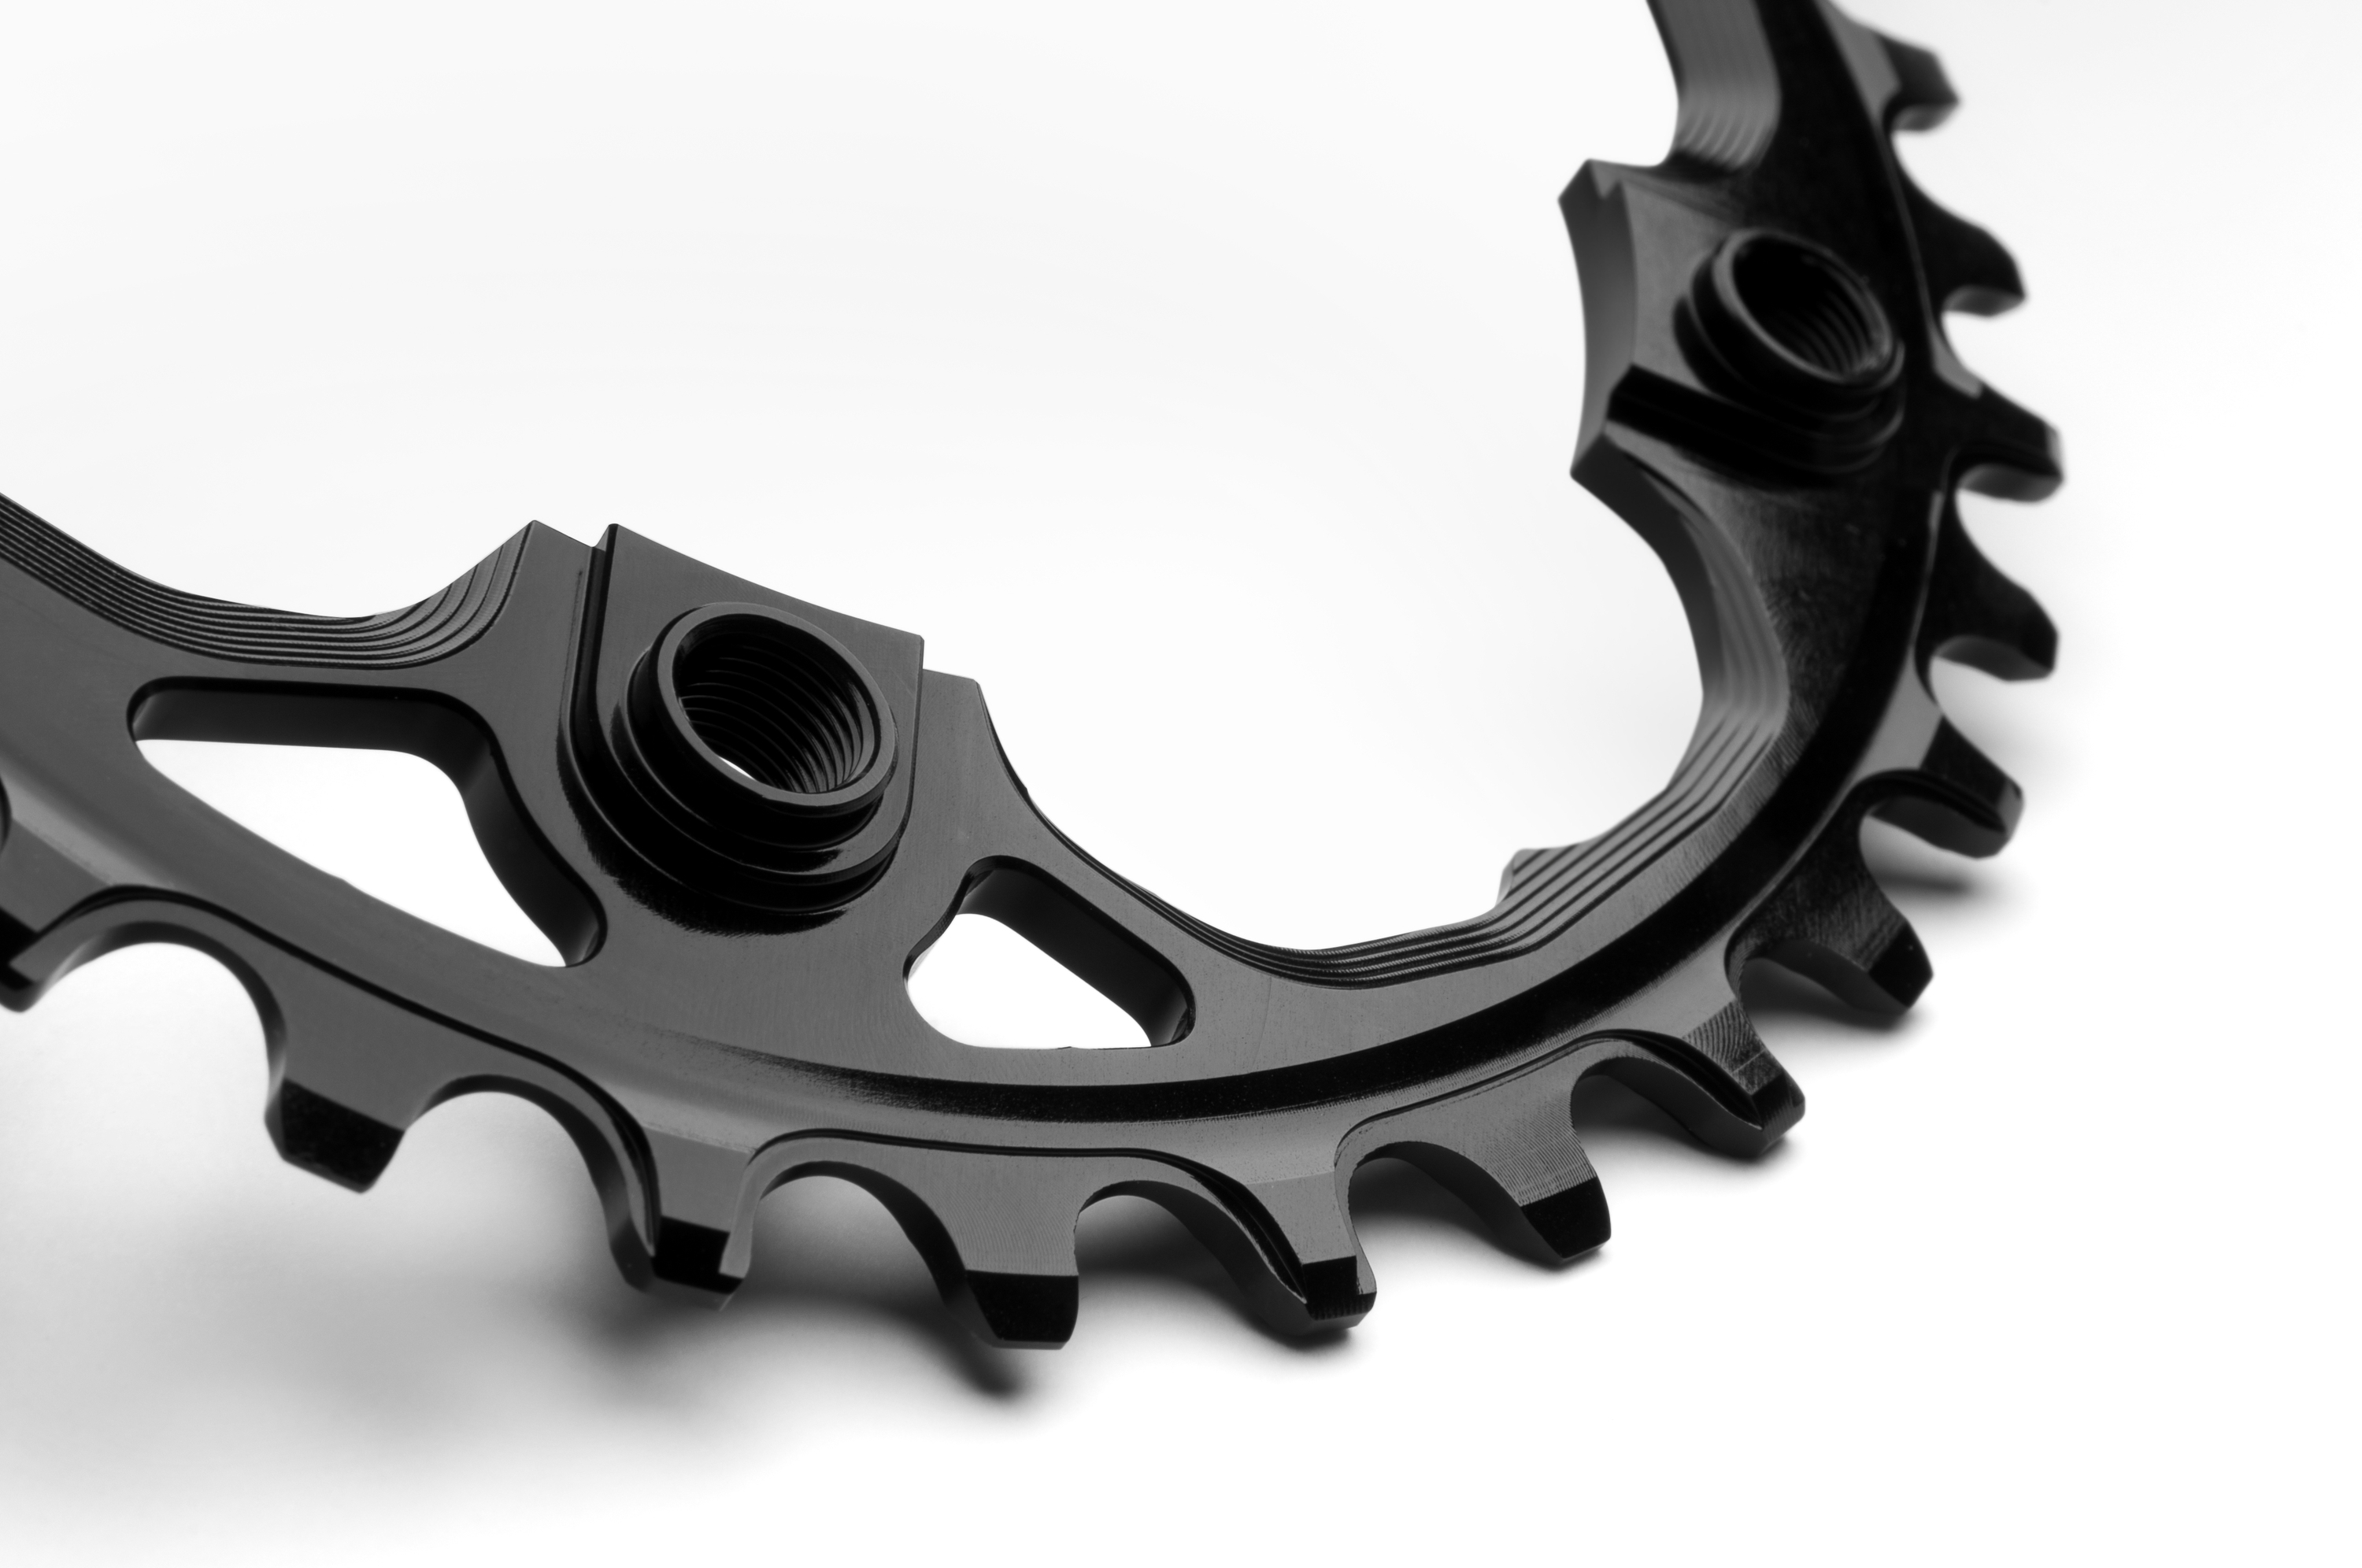 OVAL 94 BCD N/W chainring for SRAM